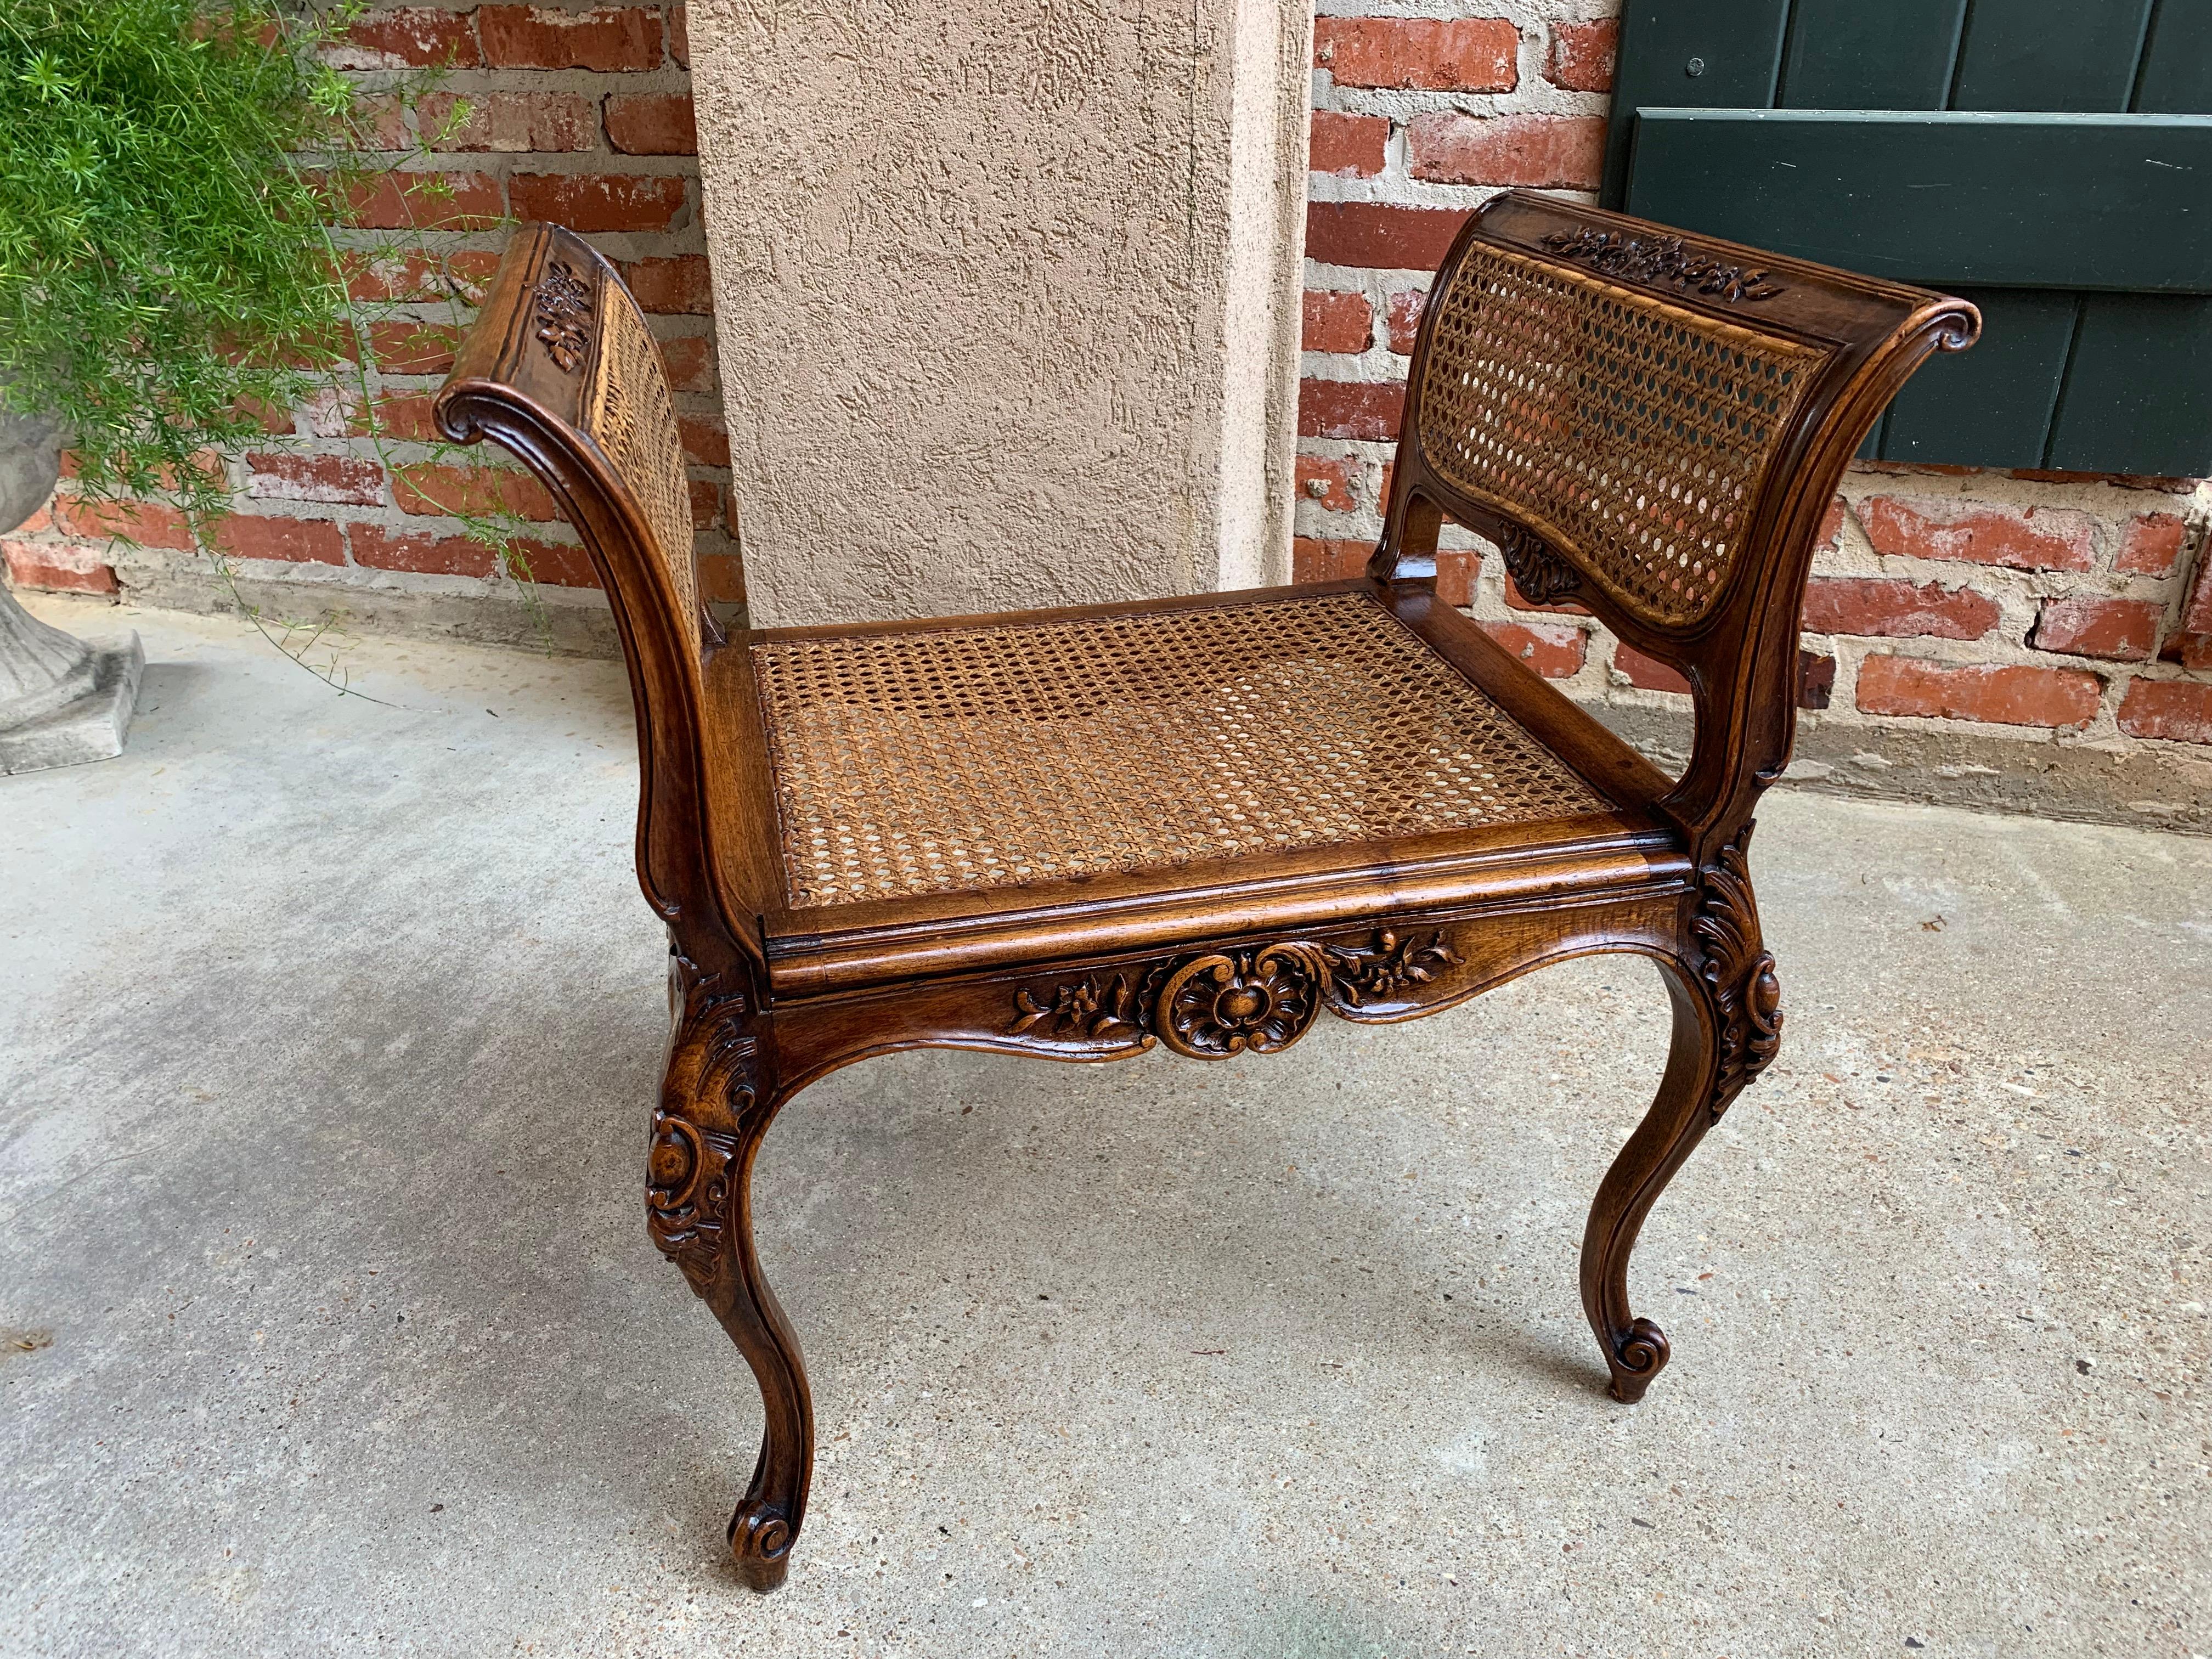 Direct from France, a beautiful antique French bench seat with lovely carvings throughout and original cane seat and sides!~
~The profile immediately catches your eye with it’s scrolled arms and oh-so-French long cabriole legs~
~Abundant carvings